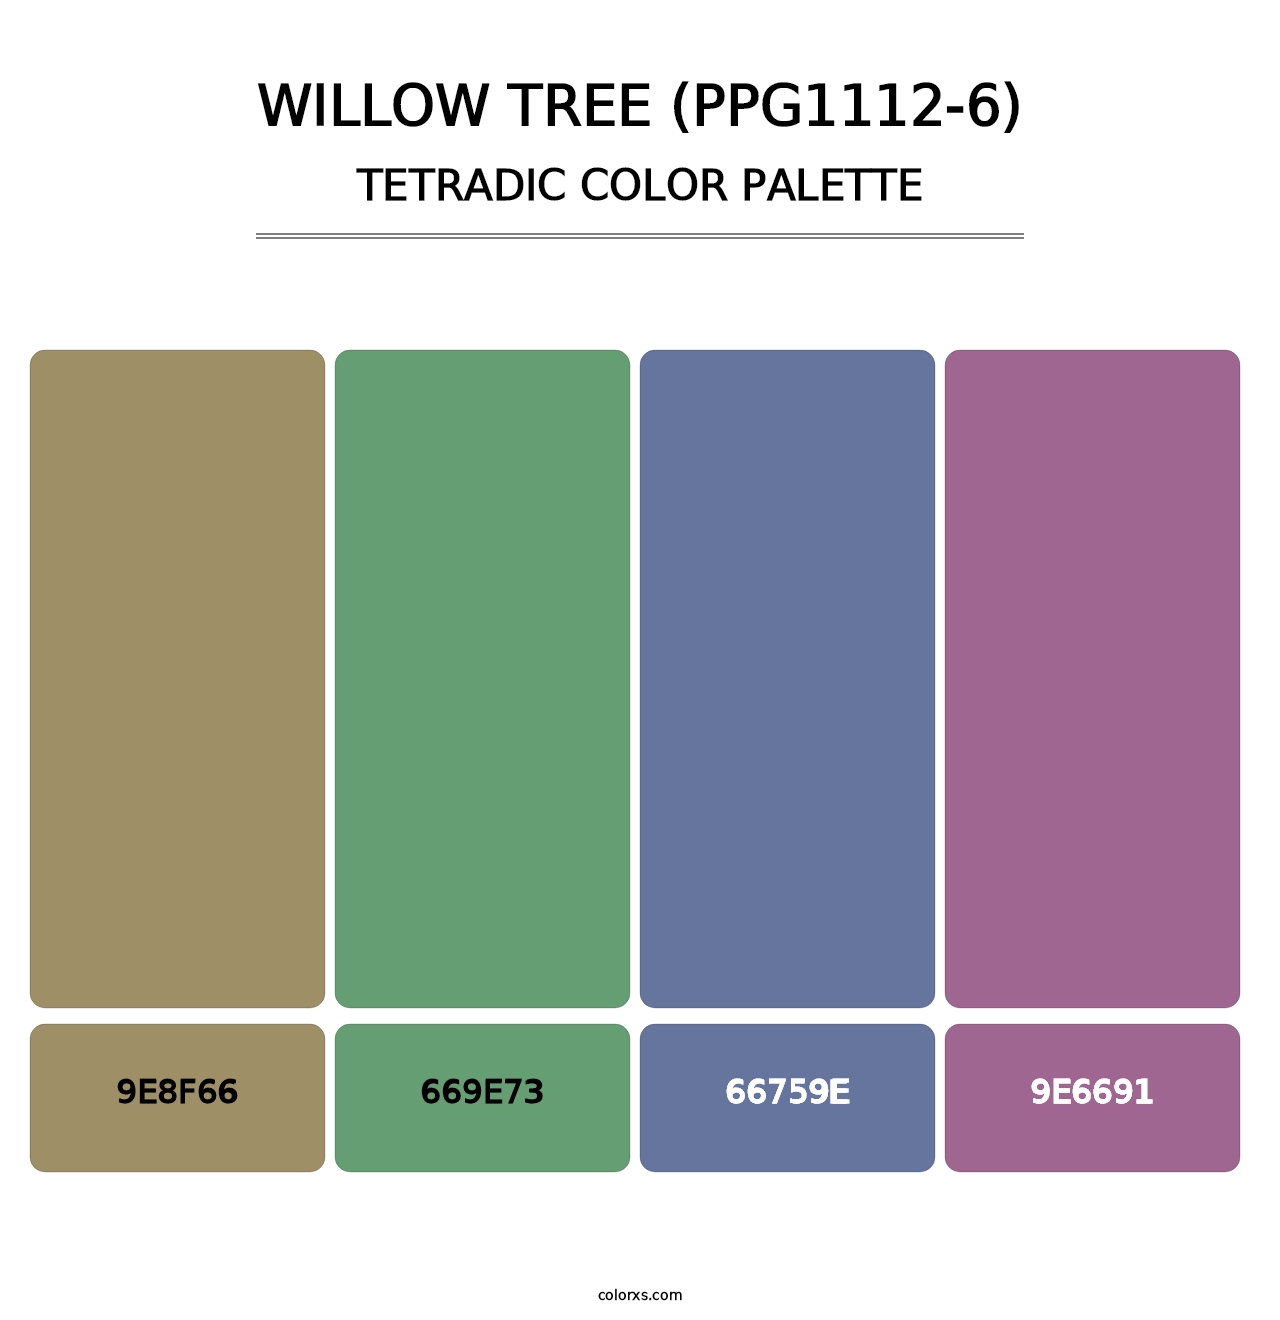 Willow Tree (PPG1112-6) - Tetradic Color Palette